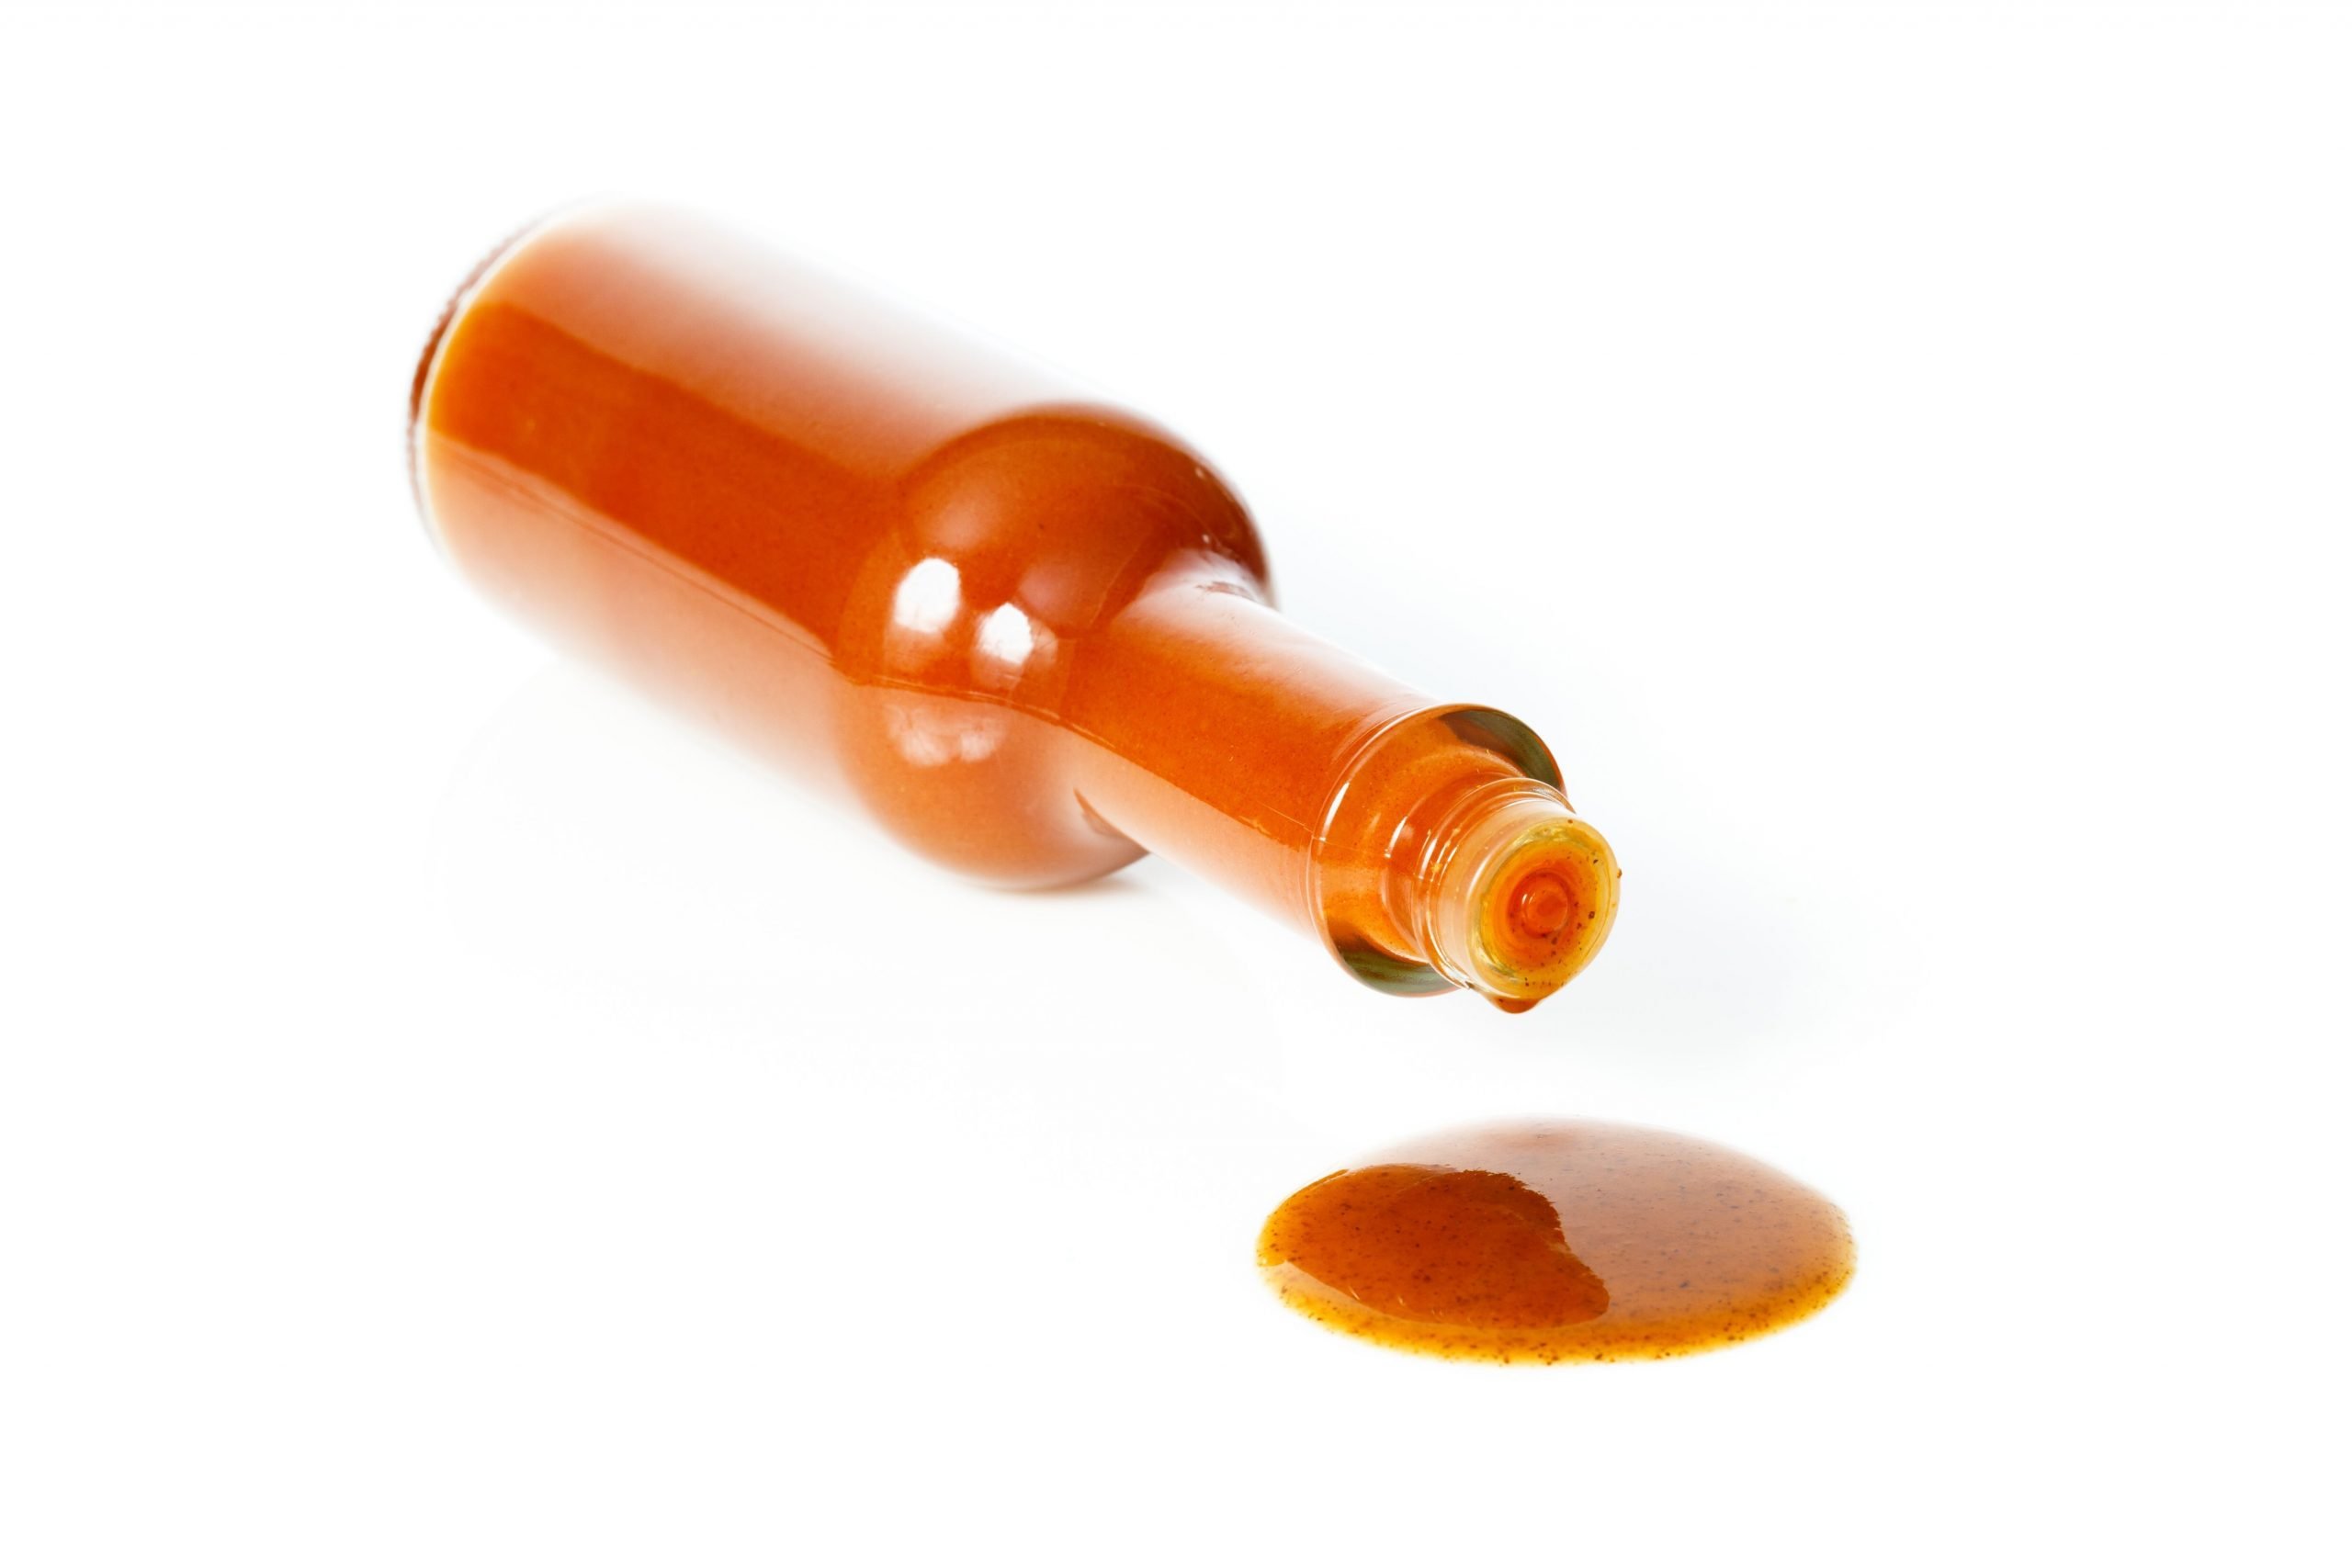 Get Rid of Hot Sauce Stains From Clothes and Carpet